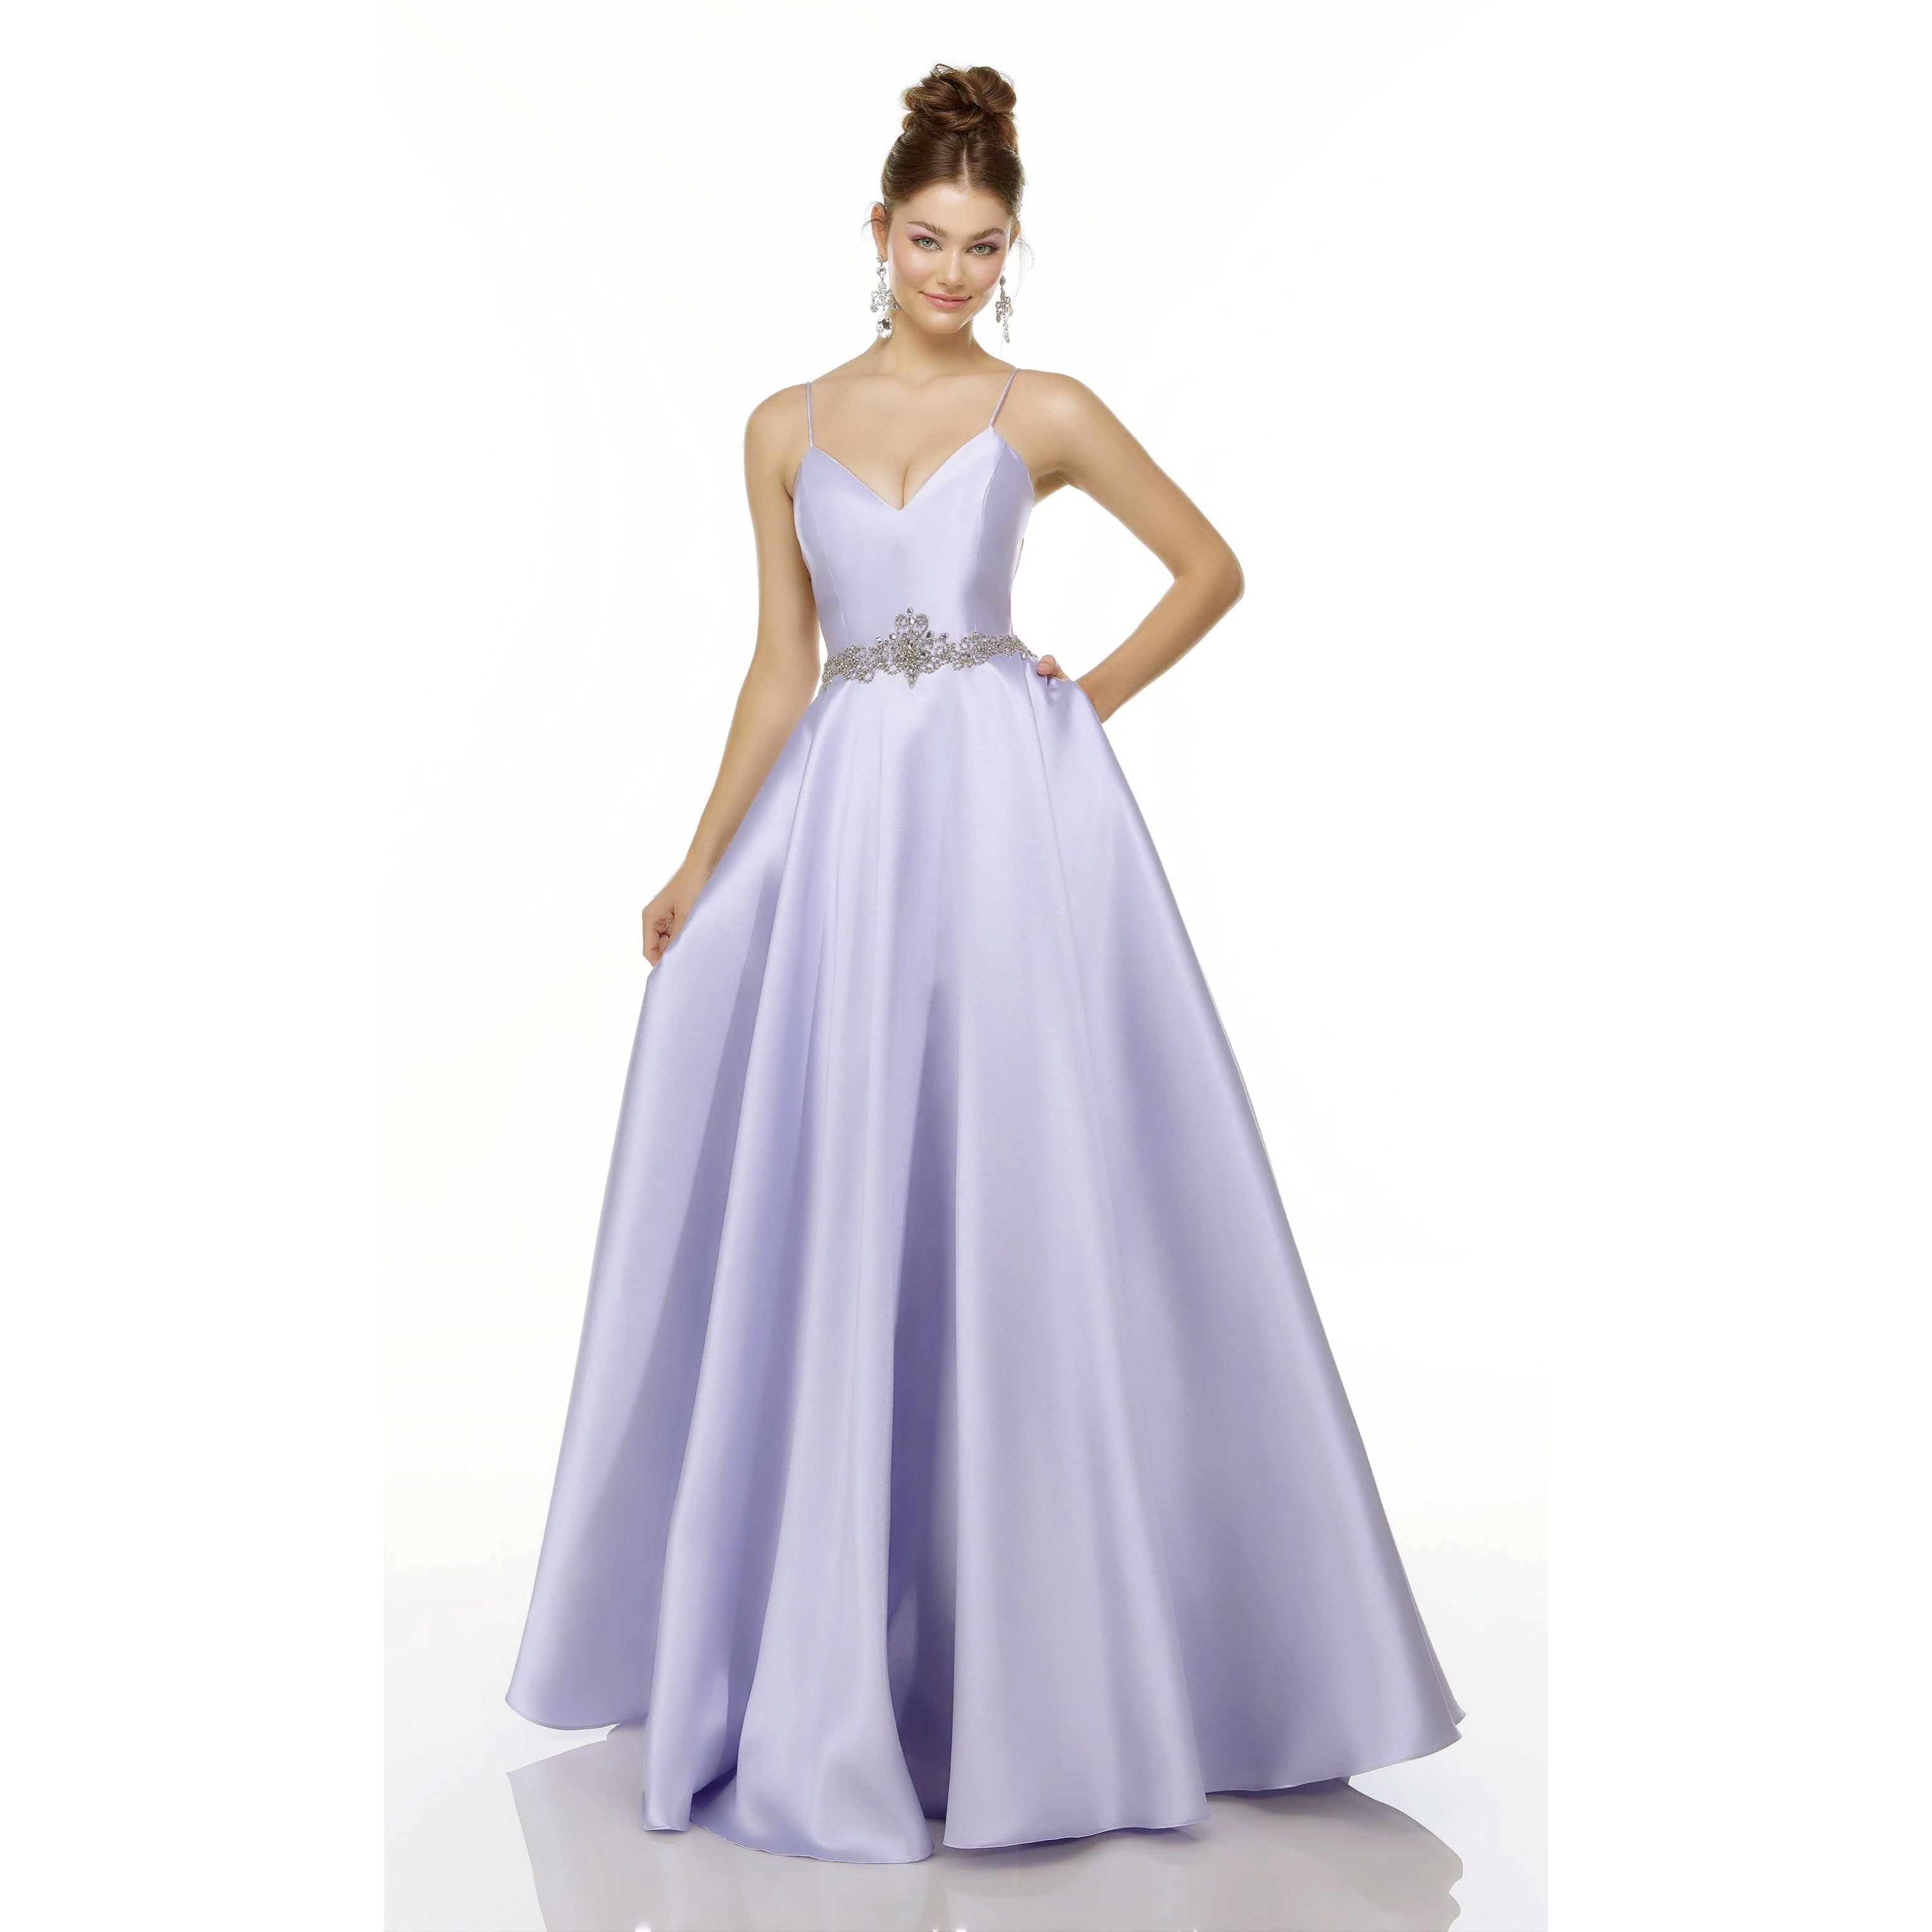 Alyce lavender ballgown, sizes 14 & 16, NEW WITH TAGS!